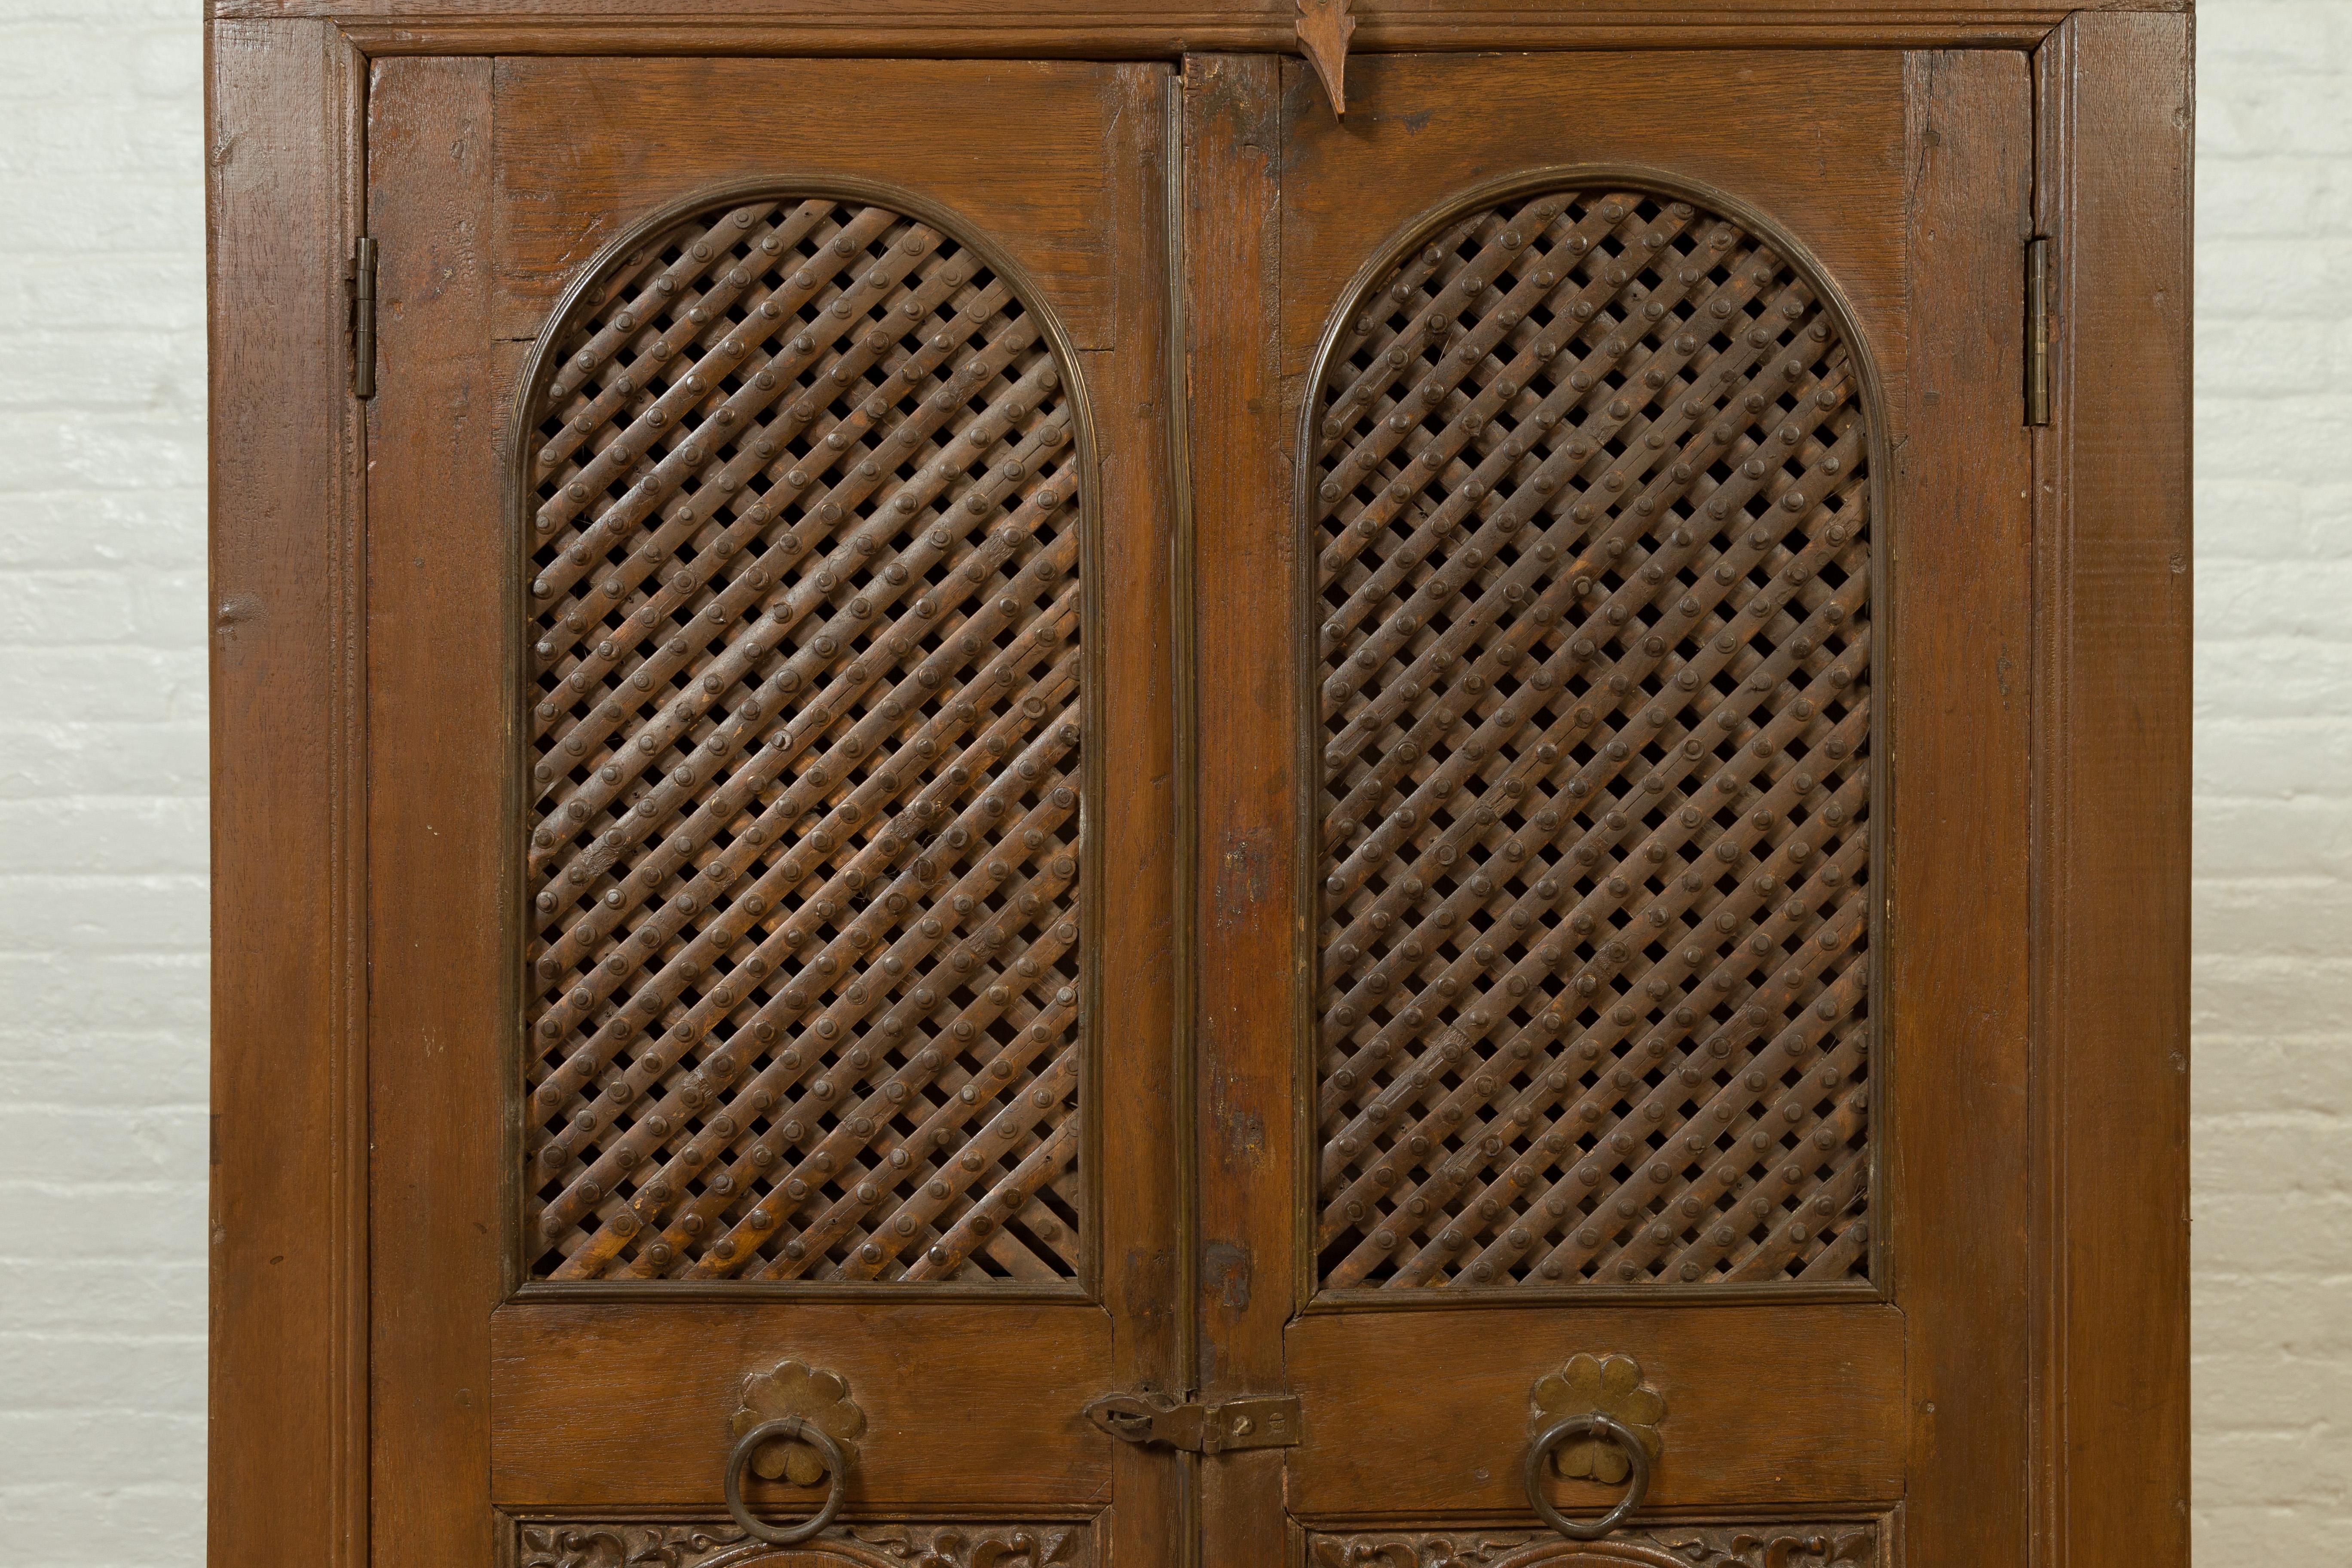 Indian 19th Century Cabinet with Metal Fretwork Motifs and Oval Medallions In Good Condition For Sale In Yonkers, NY